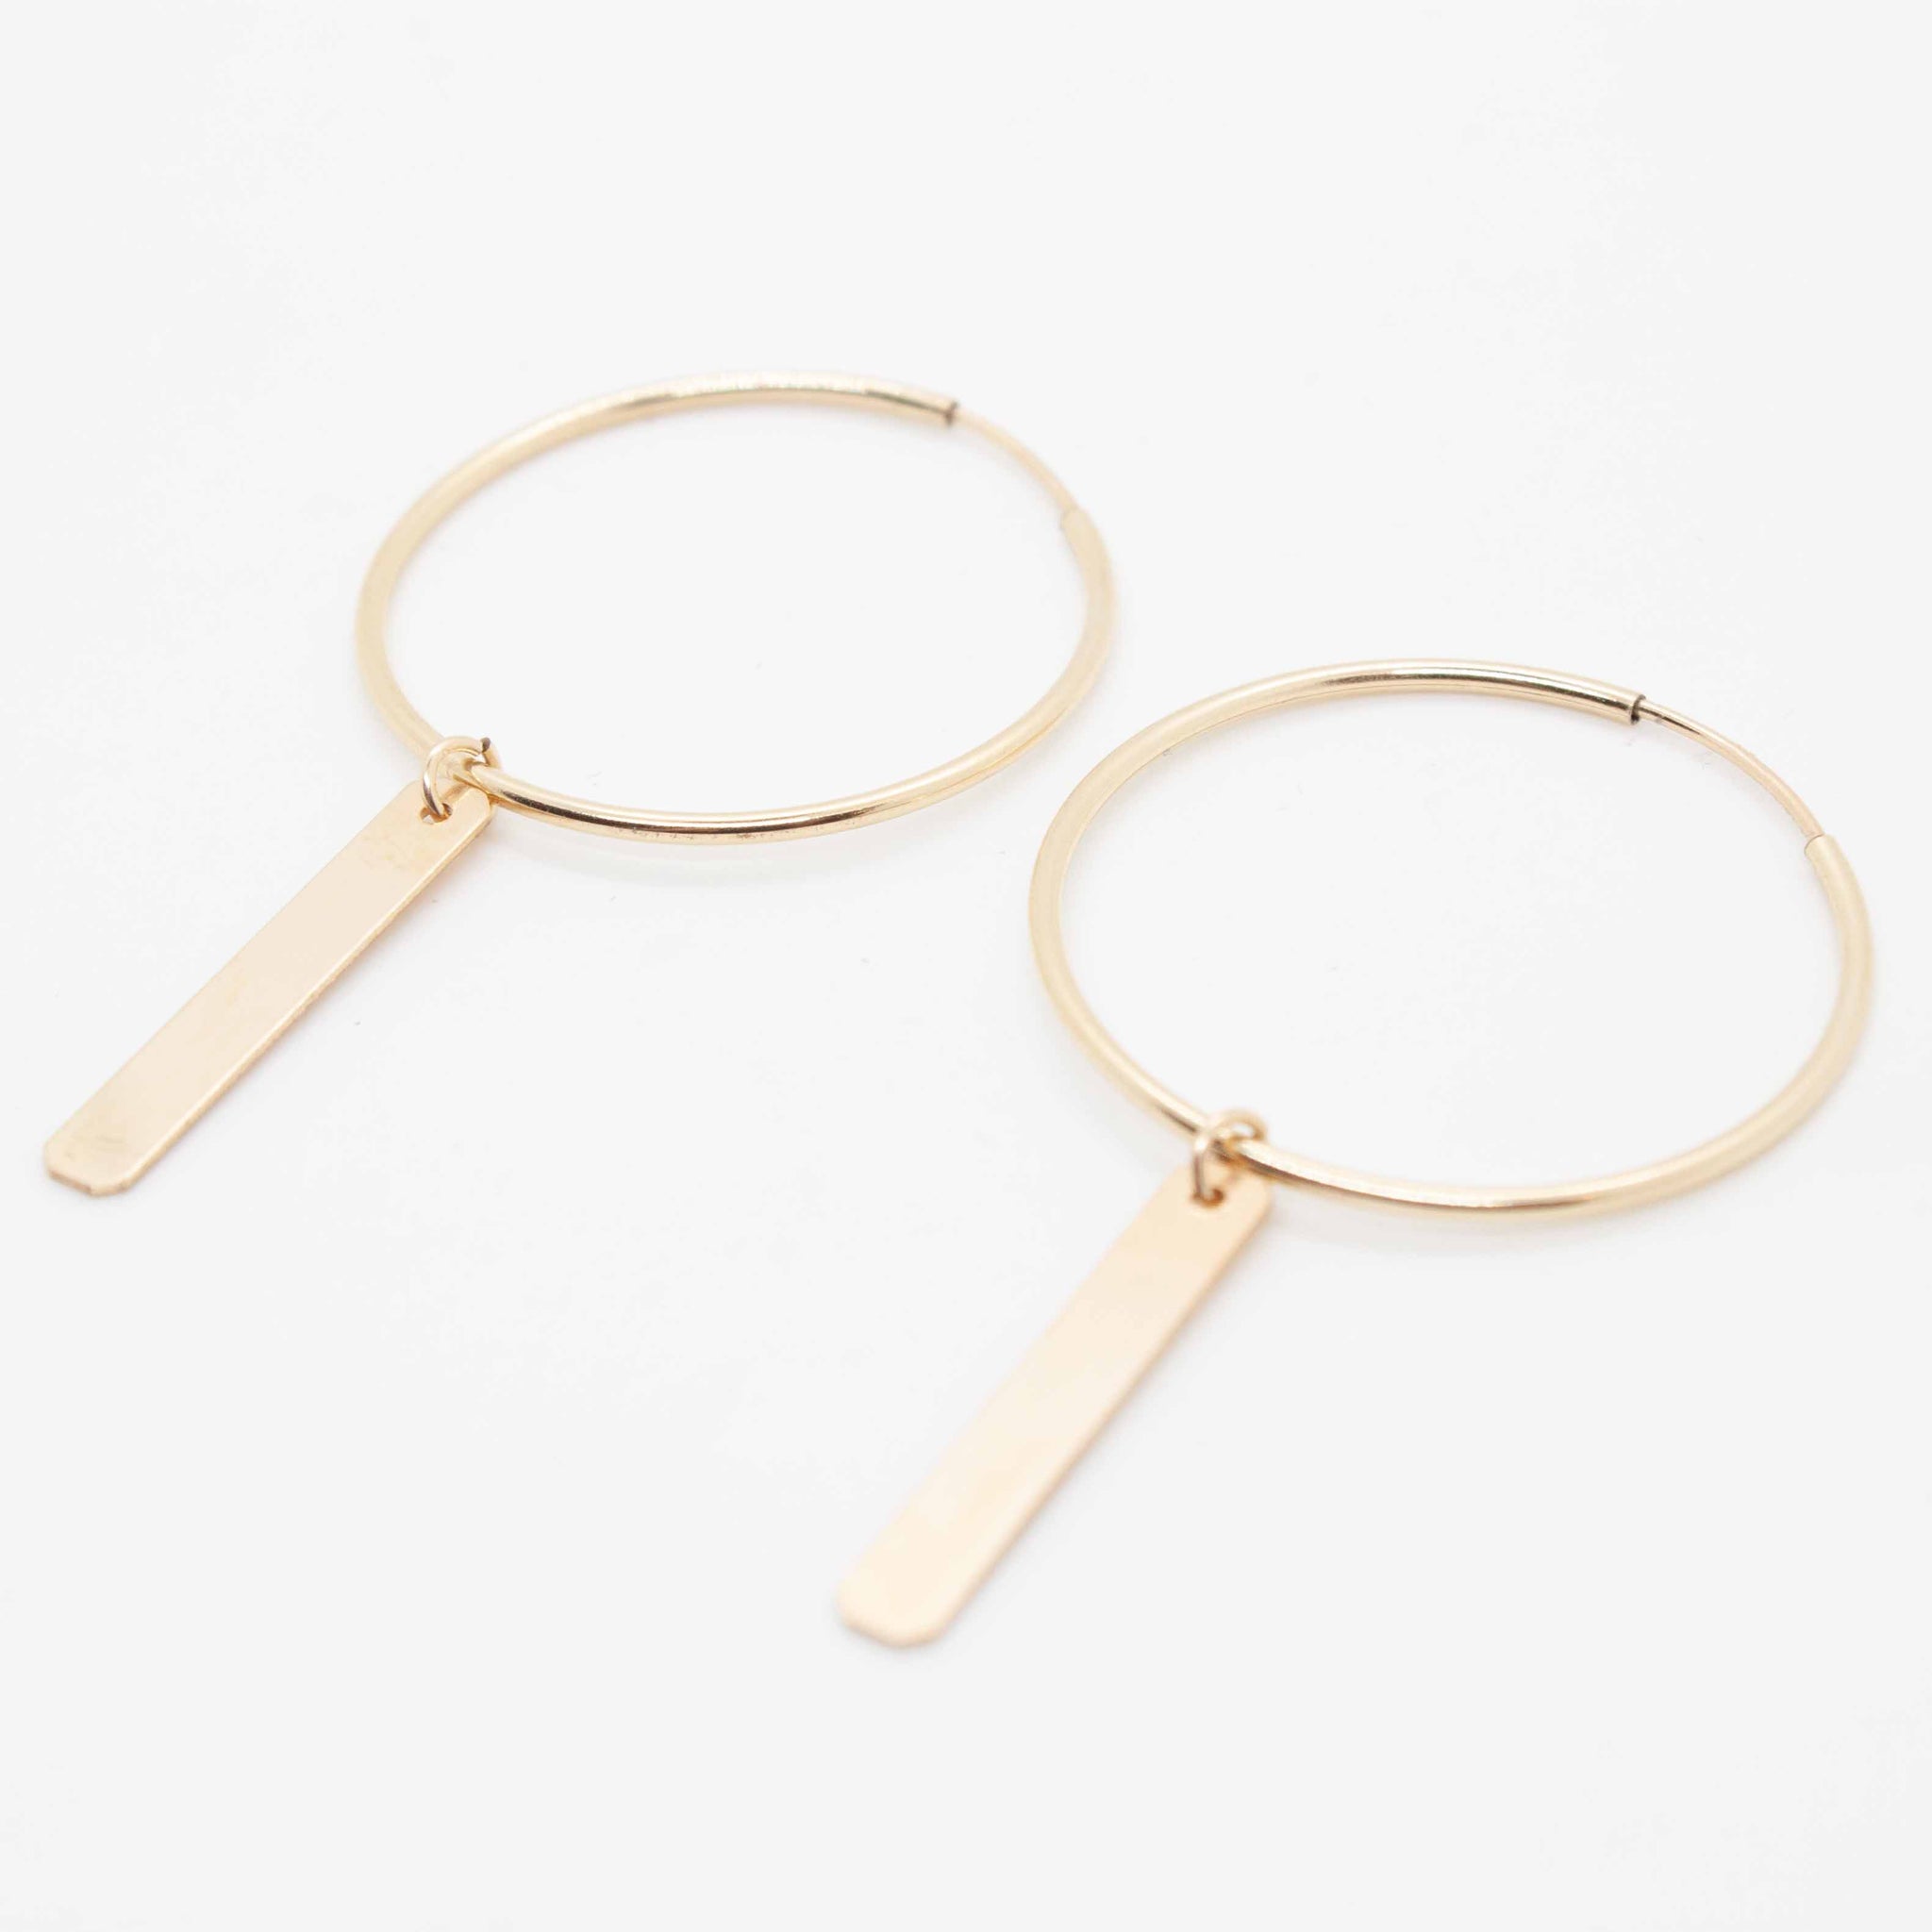 A sleek and sophisticated take on your everyday gold hoop, these are some sexy beasts.  30mm gold filled hoop earrings with gold tag charms. Made in Toronto.